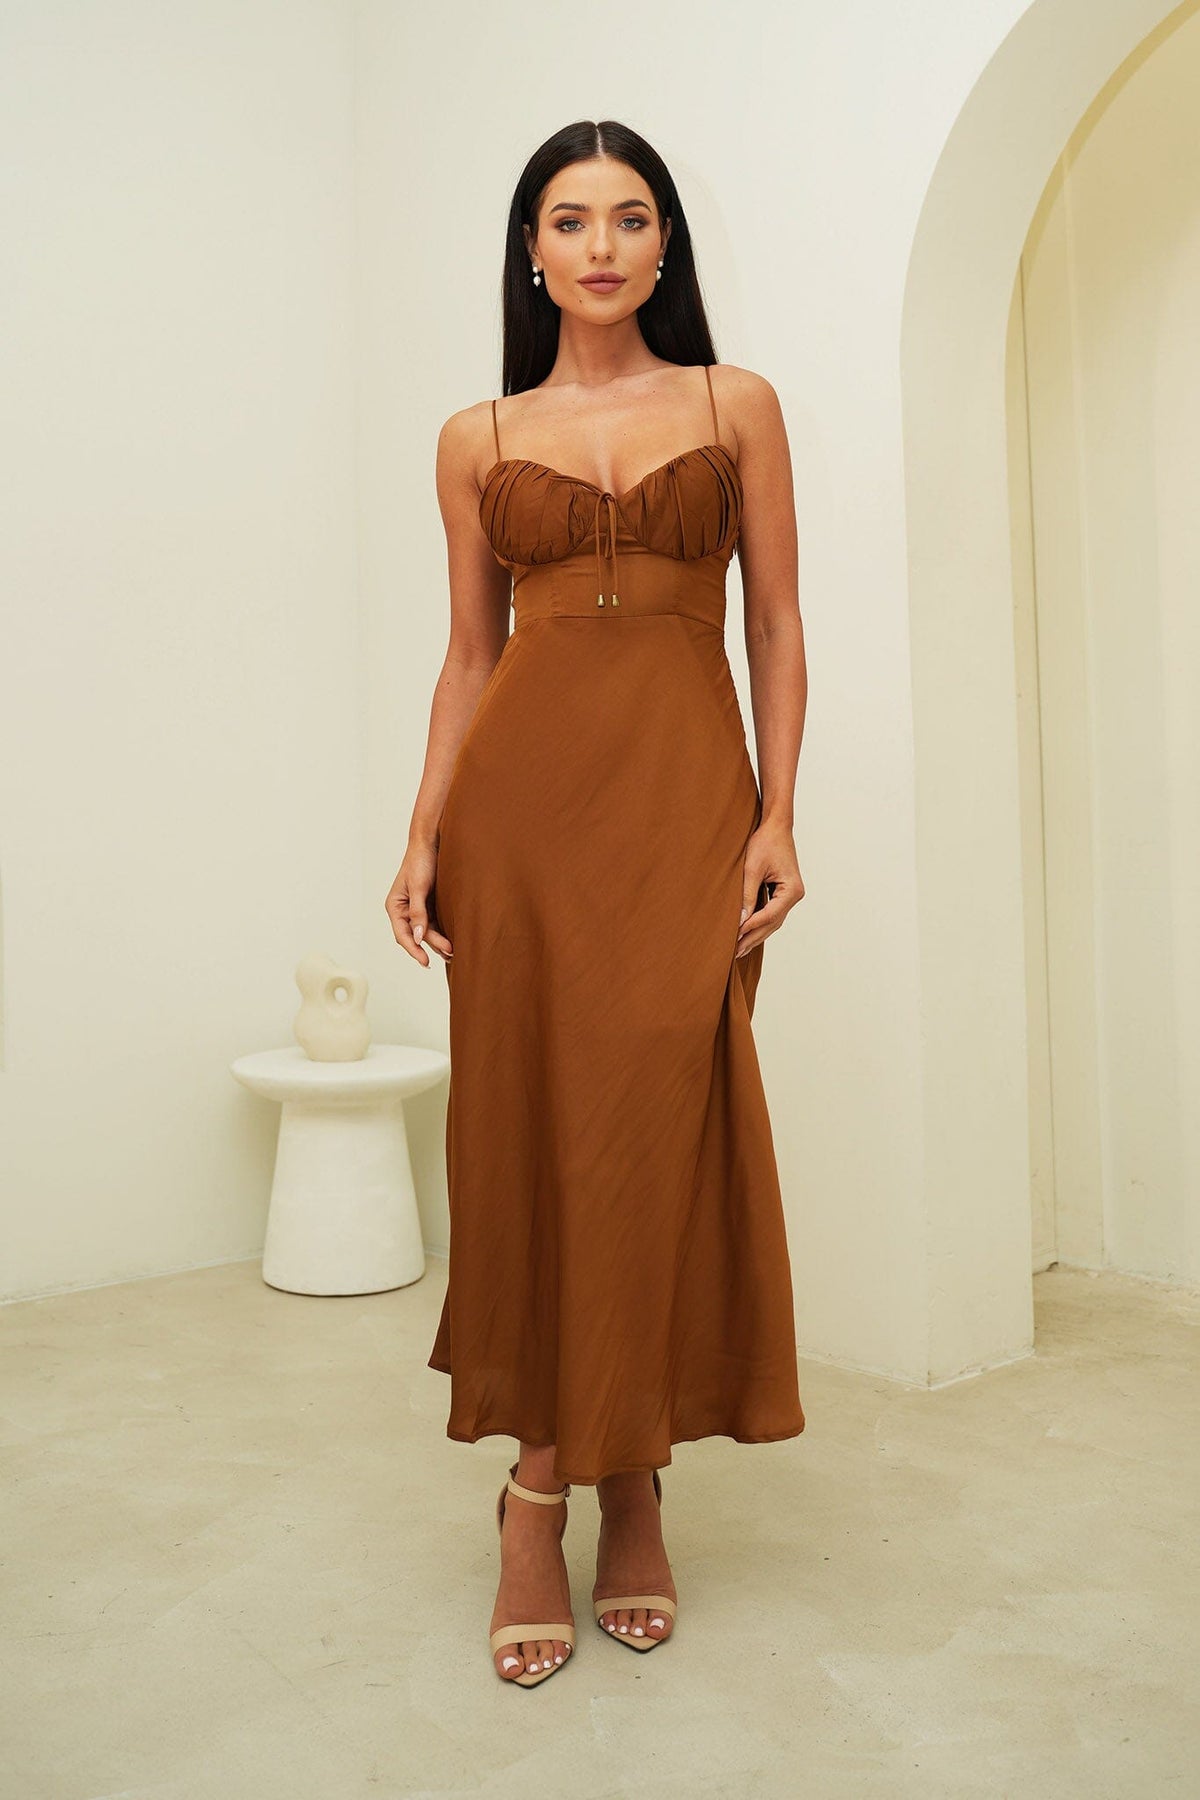 Satin Look Summer Midi Dress with Ruched Bust Detail and Thin Straps in Chocolate Brown Colour